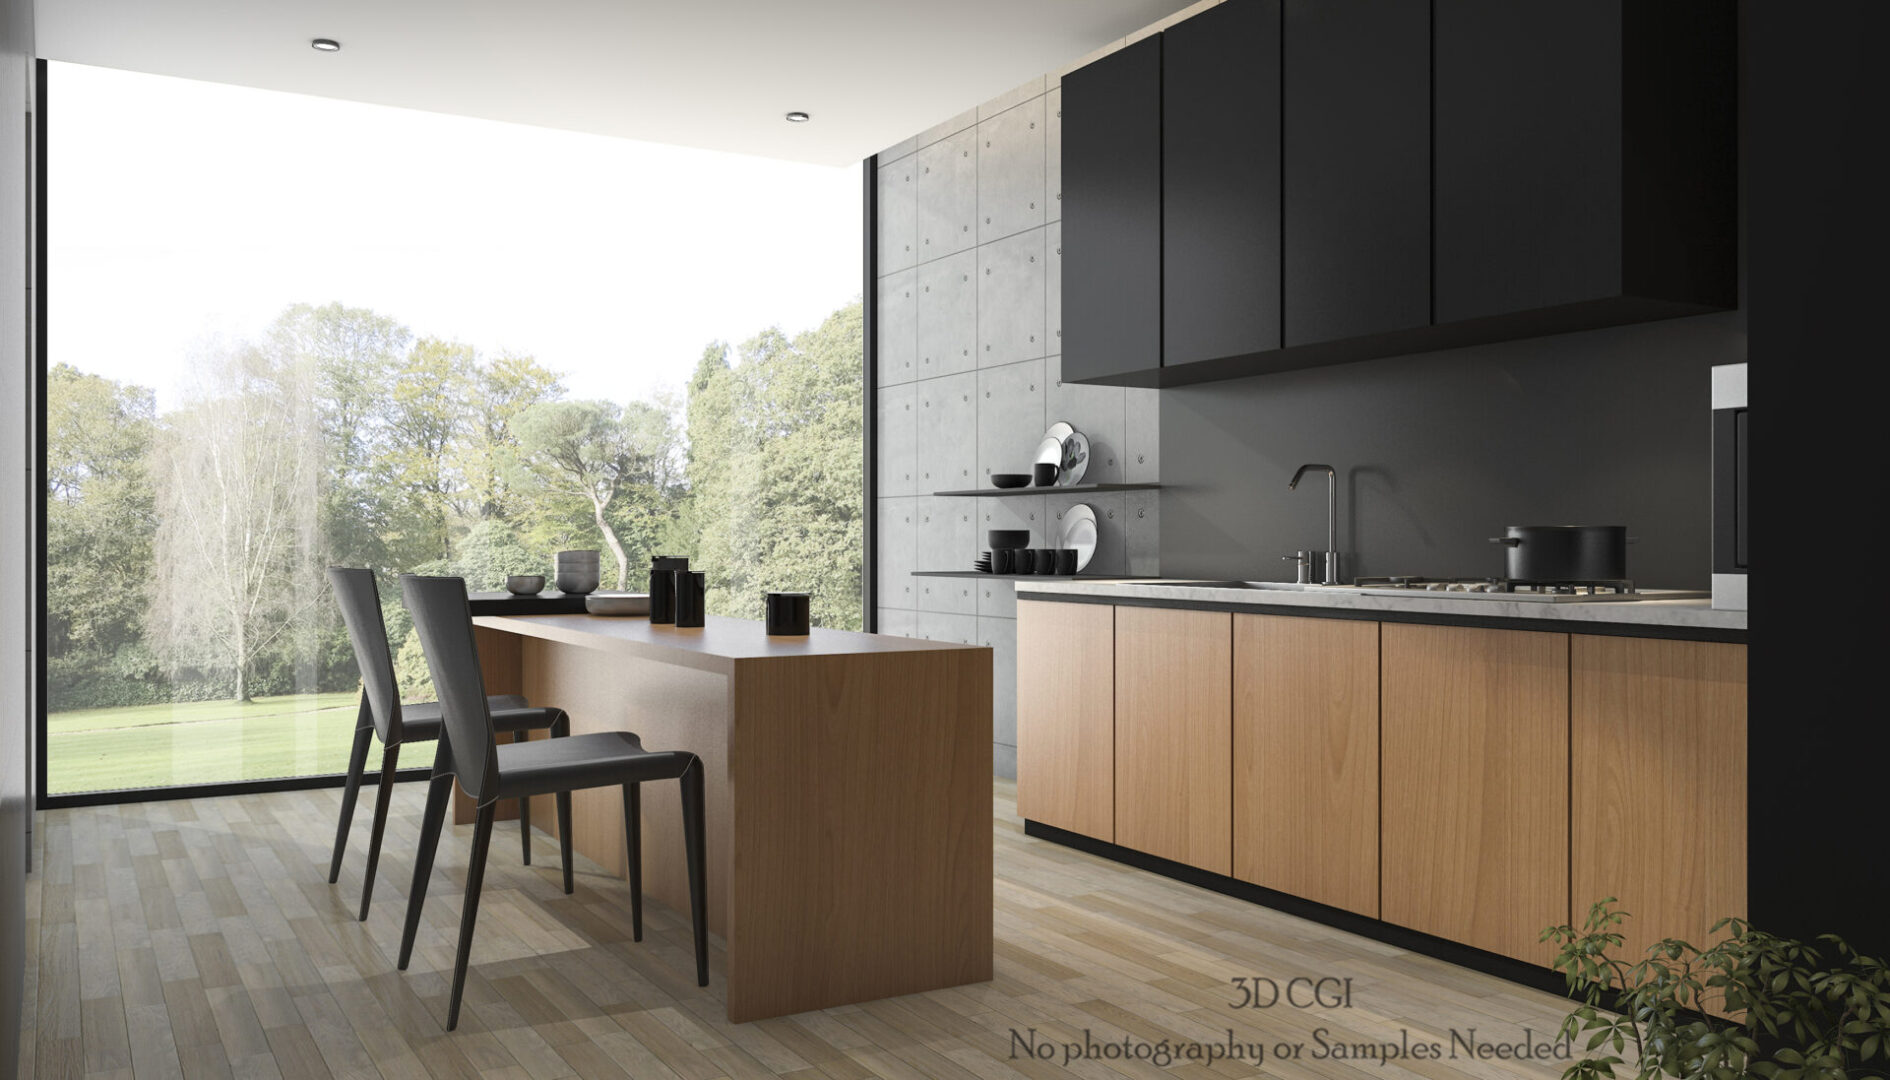 A modern kitchen with black and brown wood finish